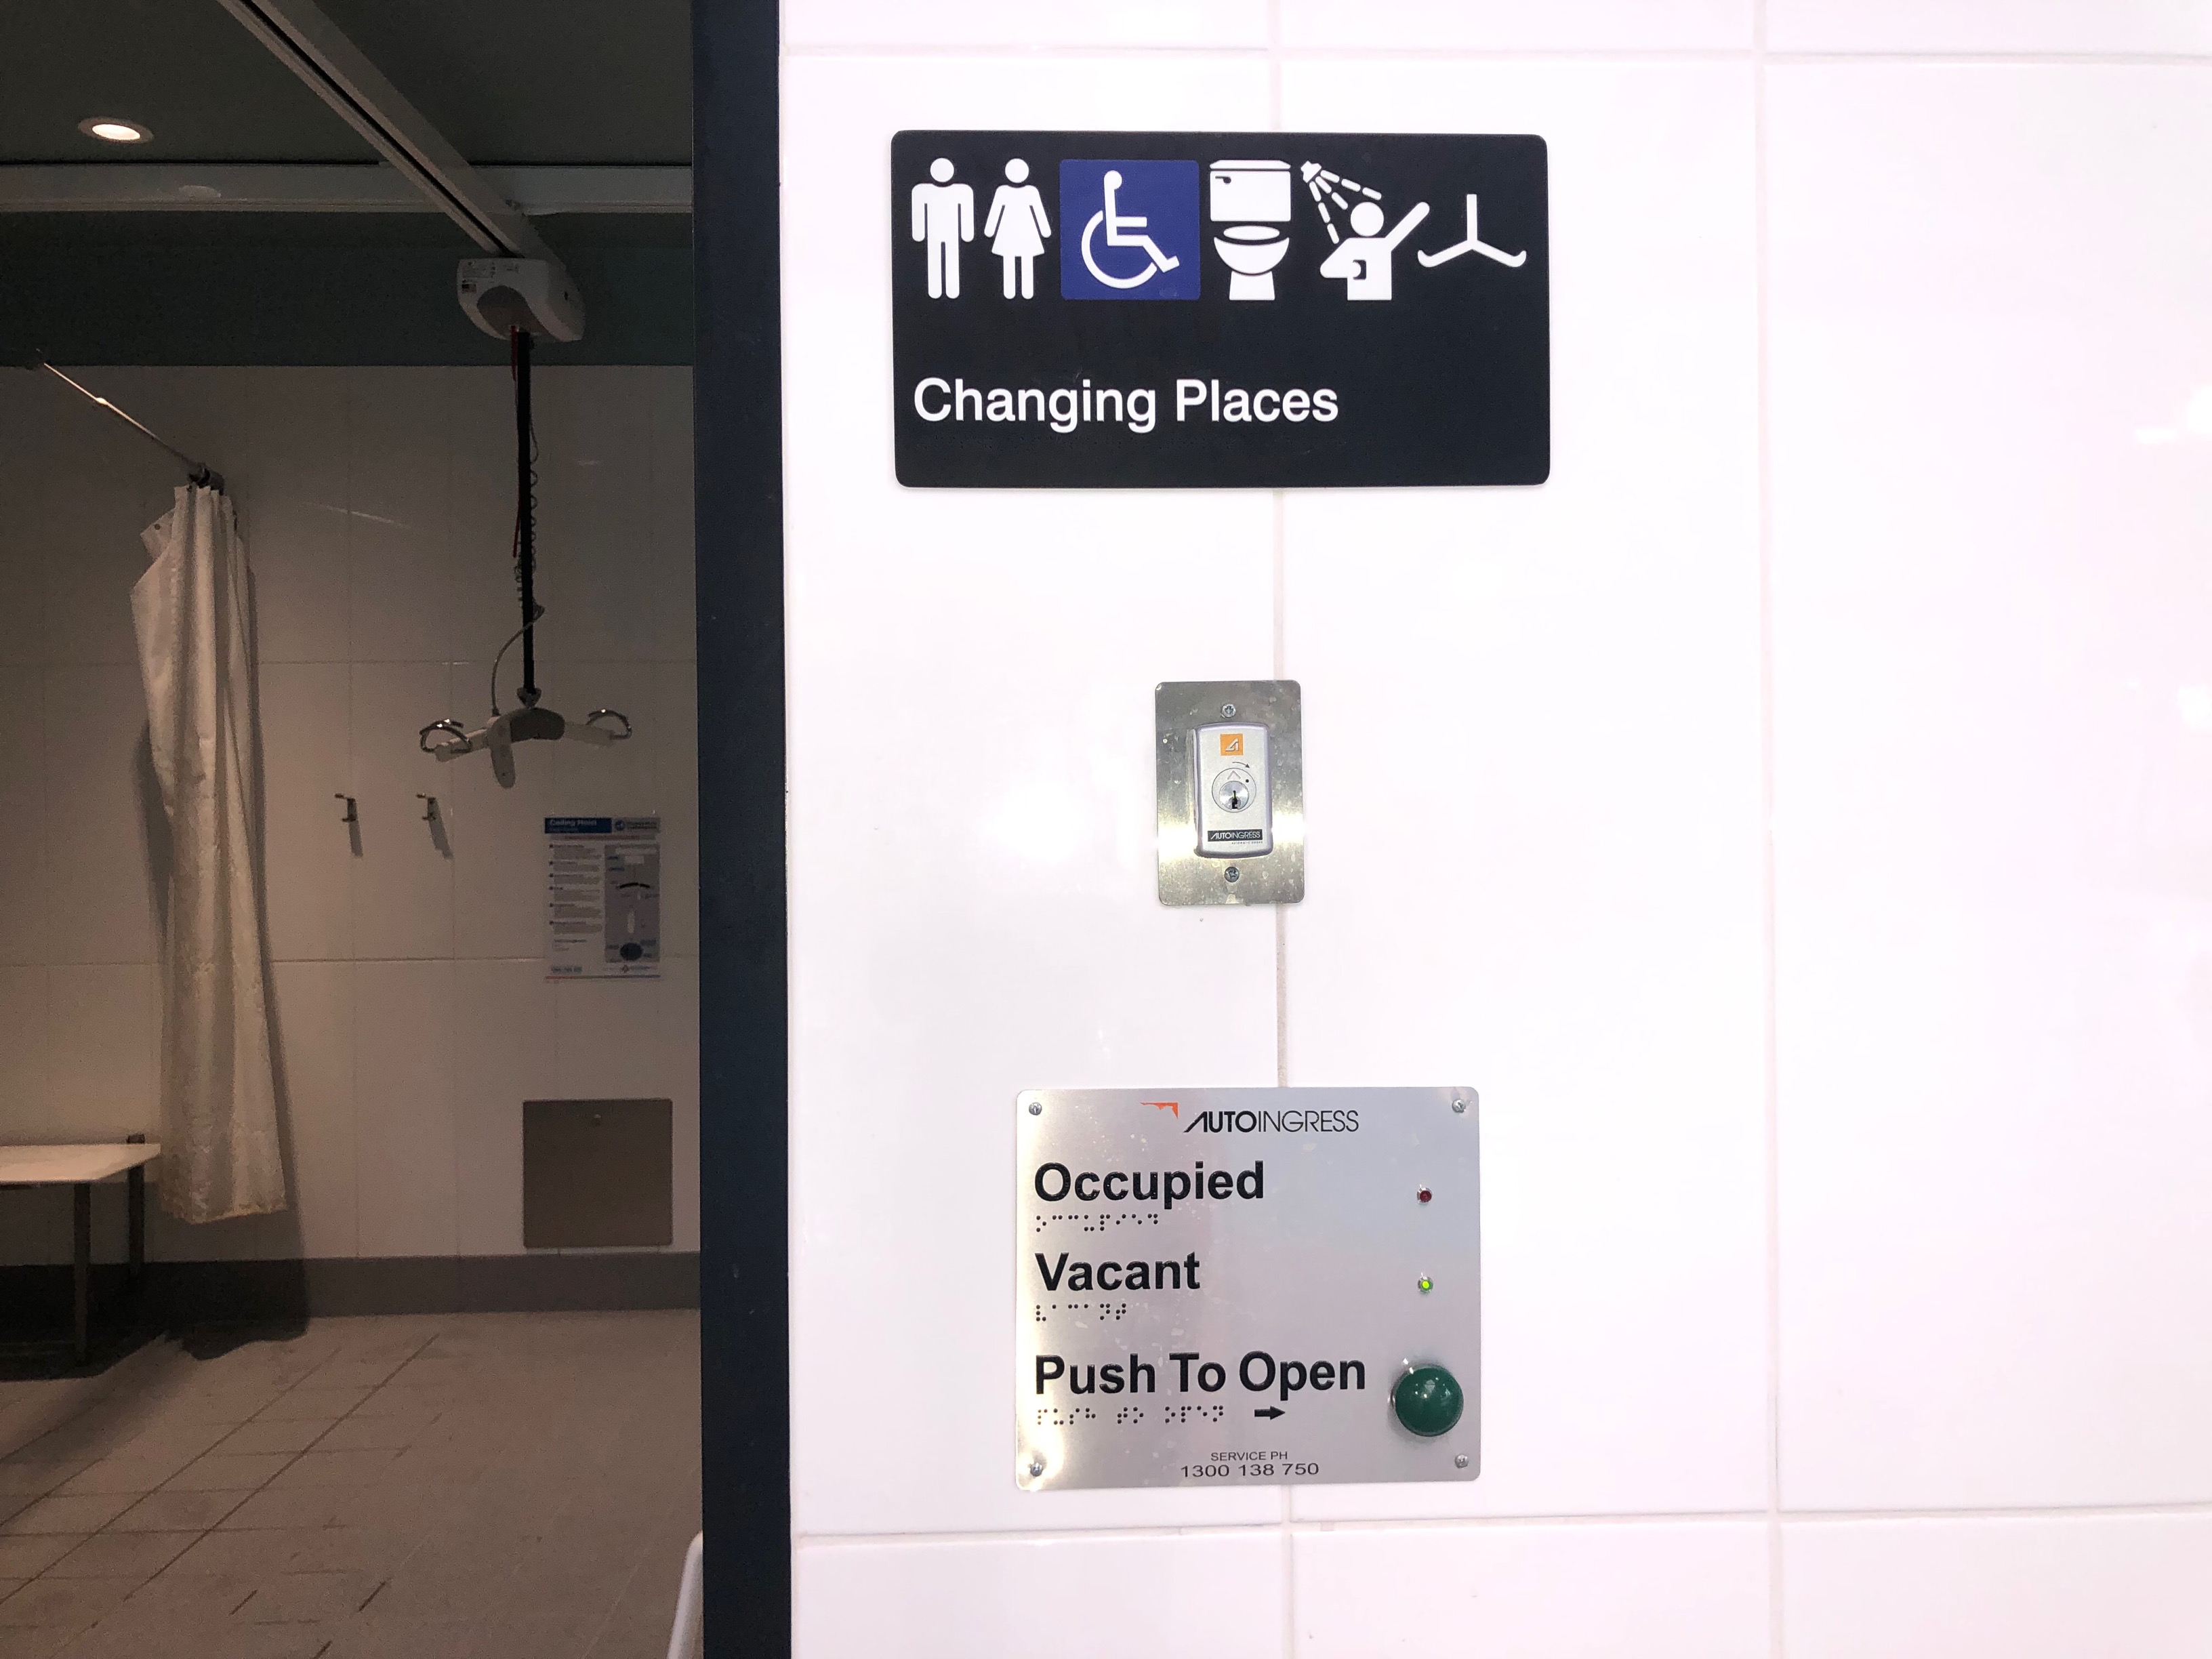 Image of signage to hoist change room with door open. Visible is the shower with privacy screens and entry signage featuring braille information.